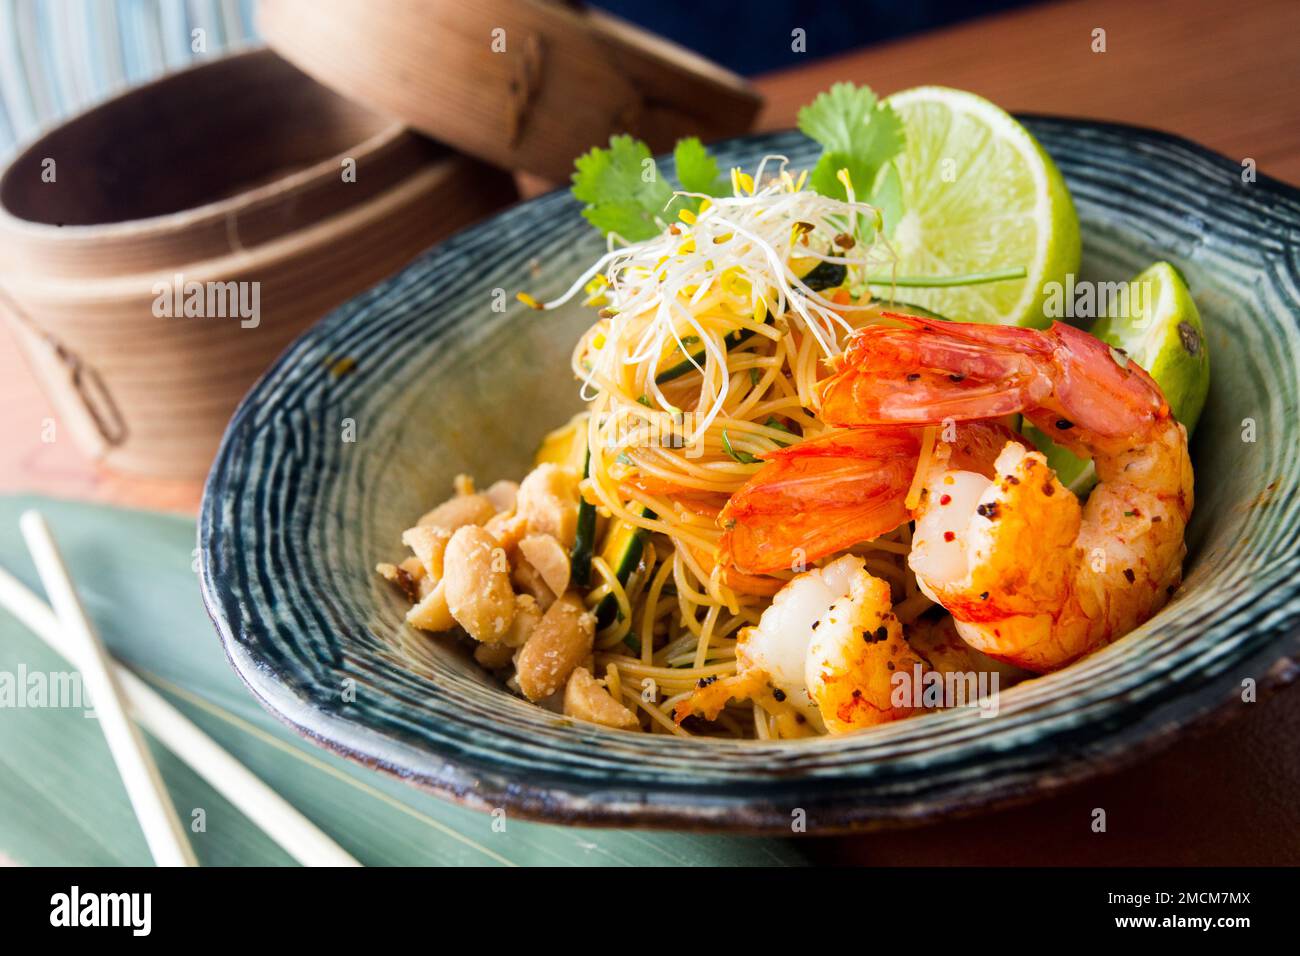 Pad thai, pad thai or pad thai, is a stir-fried rice noodle dish often served as street food in Thailand as part of the country's cuisine. Stock Photo